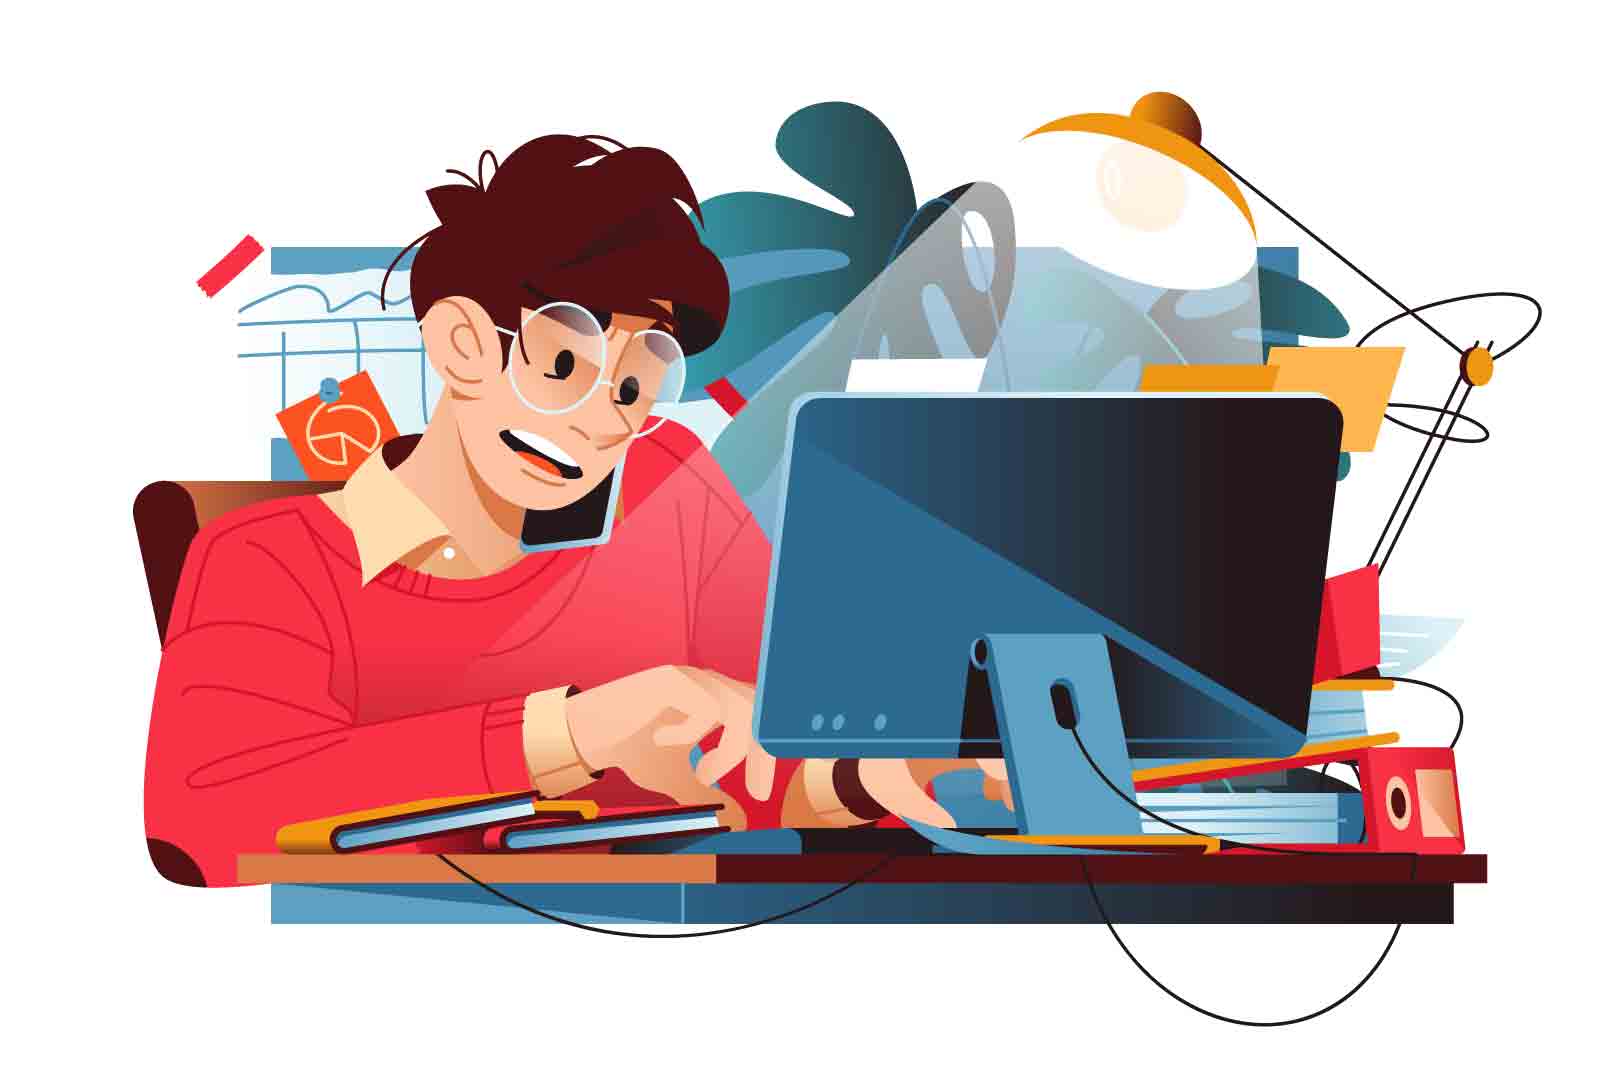 Busy worker sits at desk with computer, frantically typing and holding phone, vector illustration. Late overworking concept.